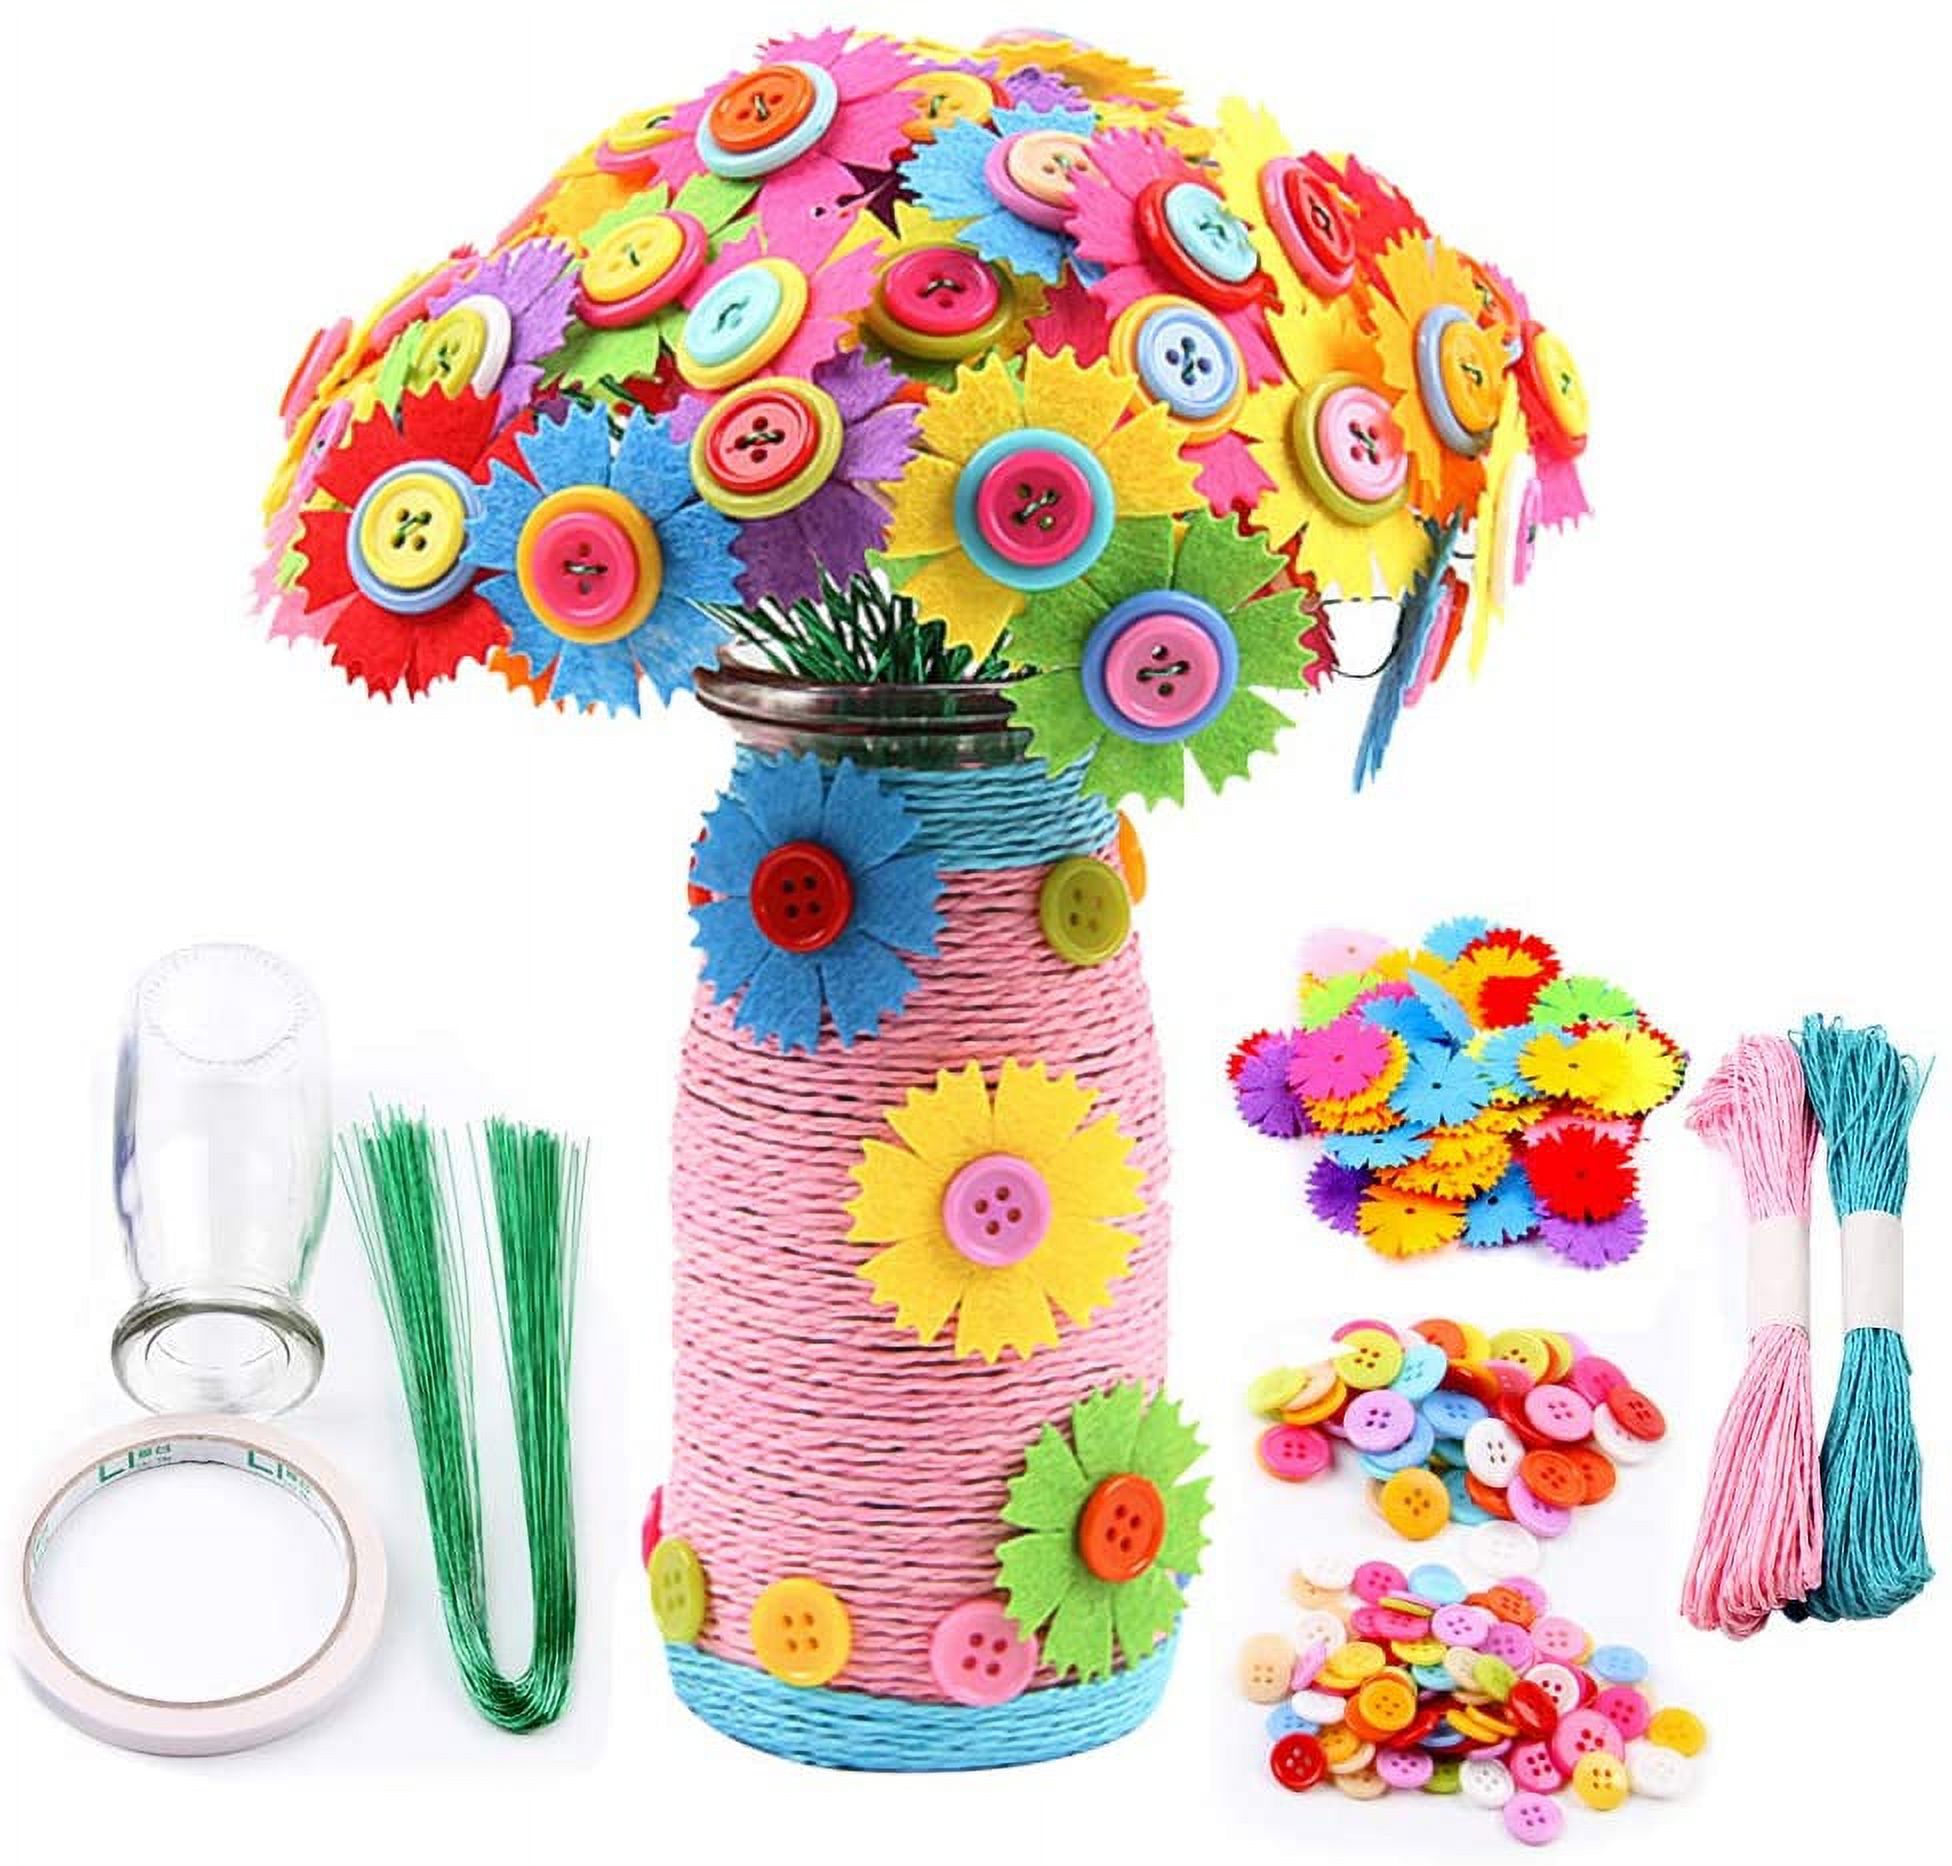 Amerteer Flower Craft Kits for Kids DIY Vase Craft Project with Buttons and Felt Flowers - Make Your Own Flower Bouquet - Fun Gift for Boys, Girls Age